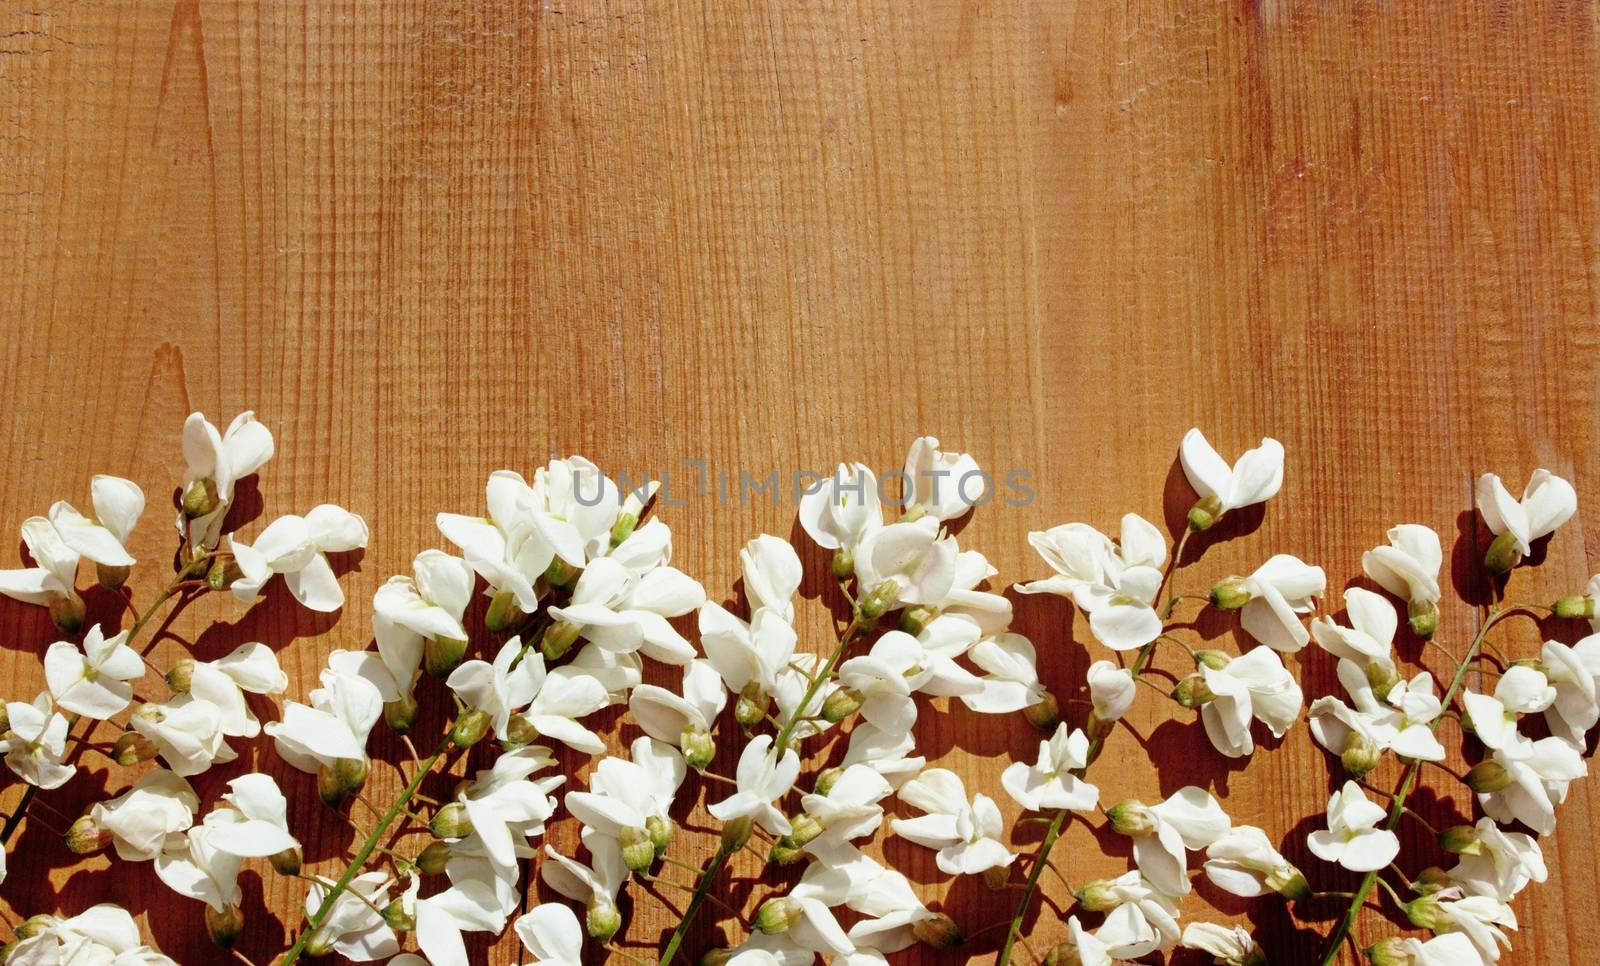 A row of white wisteria flowers on wood planks. The blank space on the top with the wooden background can be used as copyspace for creating spring time, floral or nature inspired banners.
